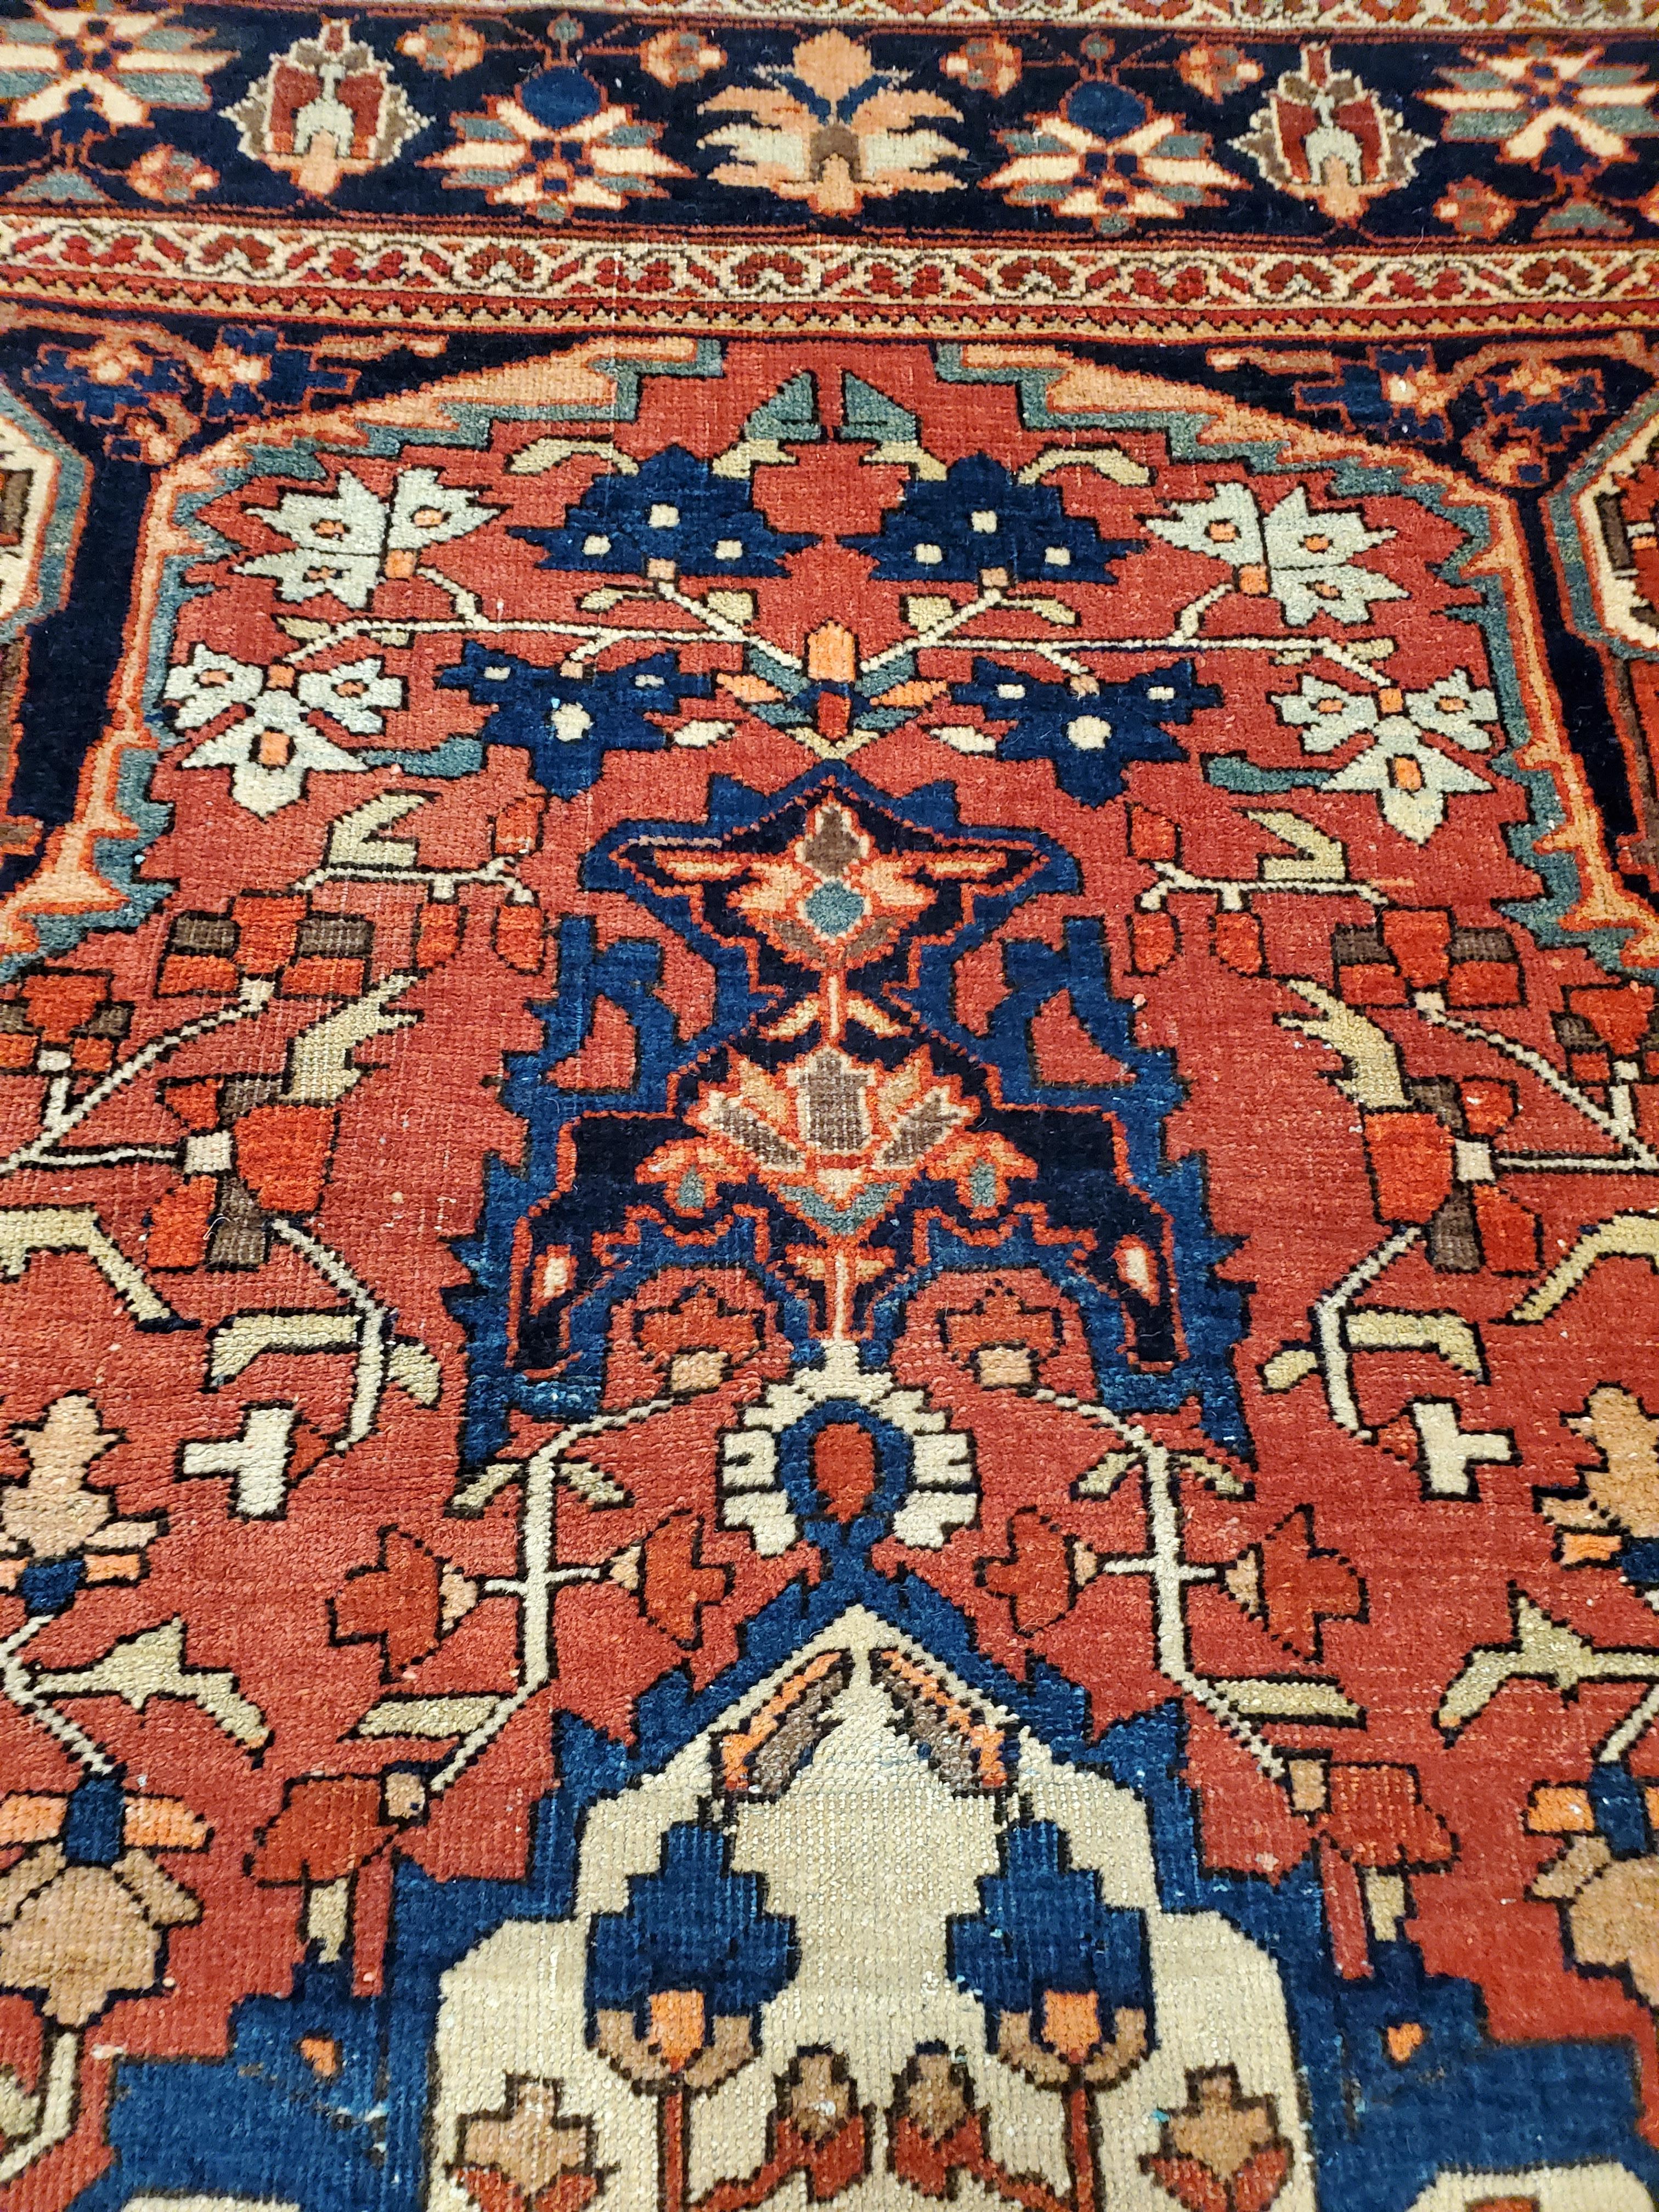 Antique Farahan Sarouk Rug, Handmade Oriental Rug, Rusty Red Navy Blue Very Fine In Excellent Condition For Sale In Port Washington, NY